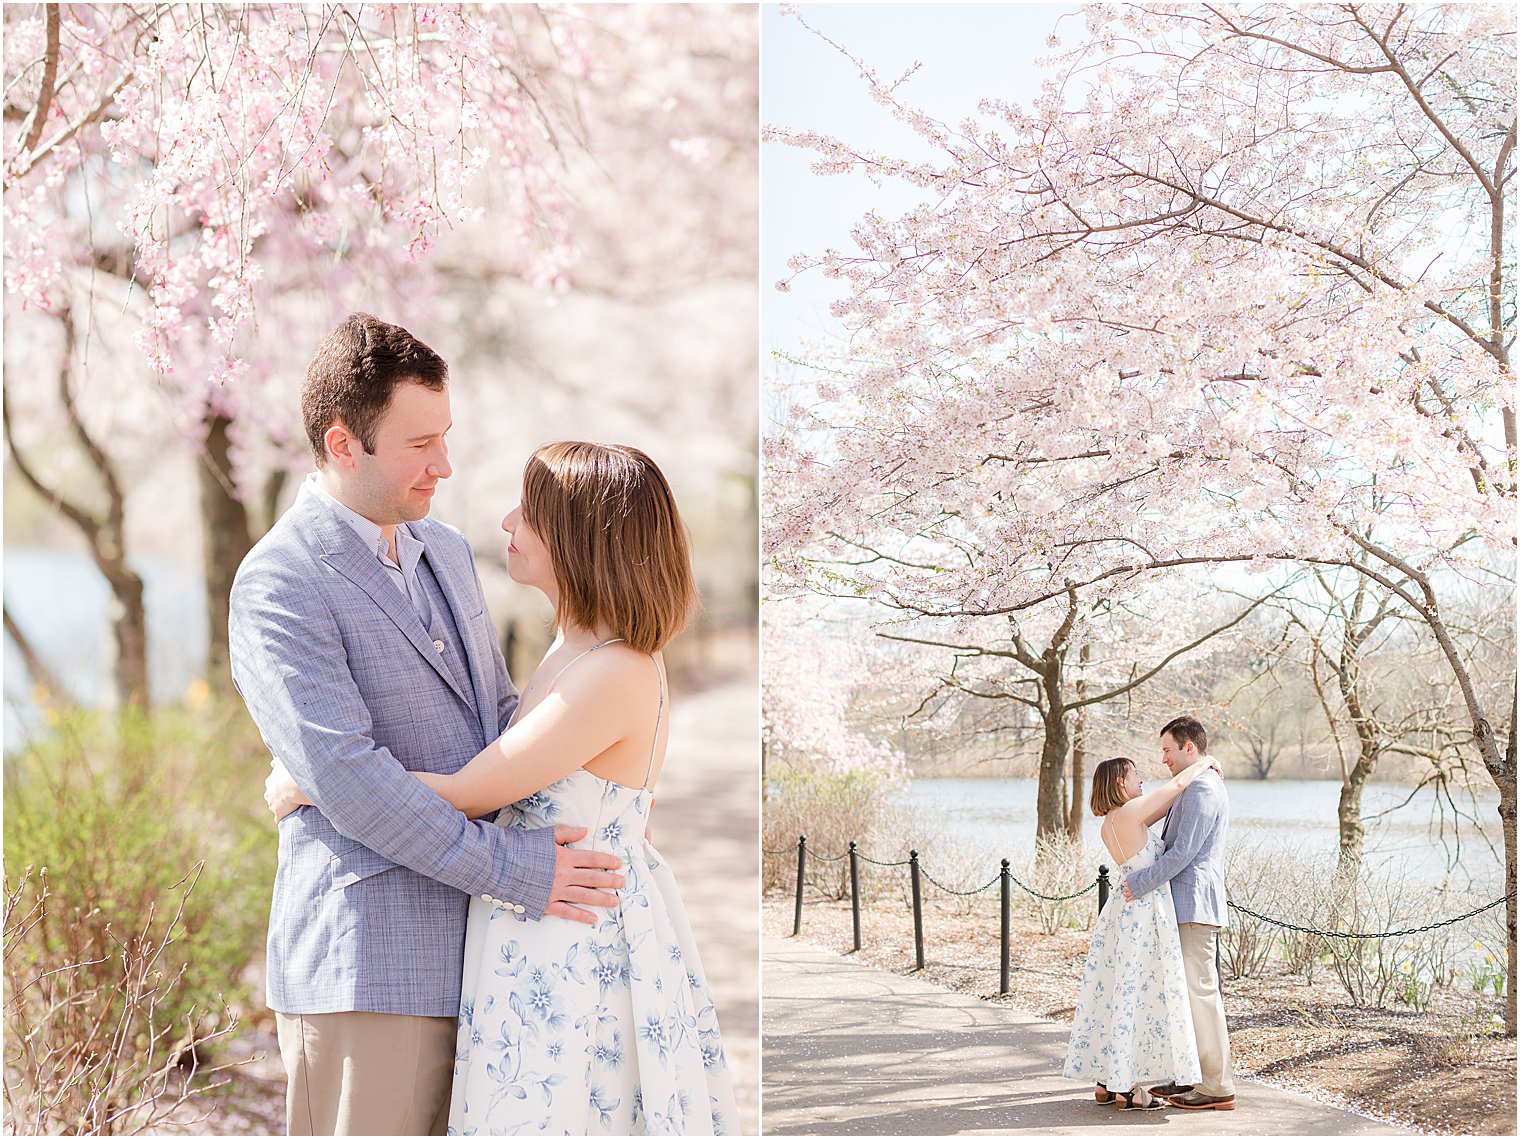 spring engagement session at Branch Brook Park with cherry blossoms